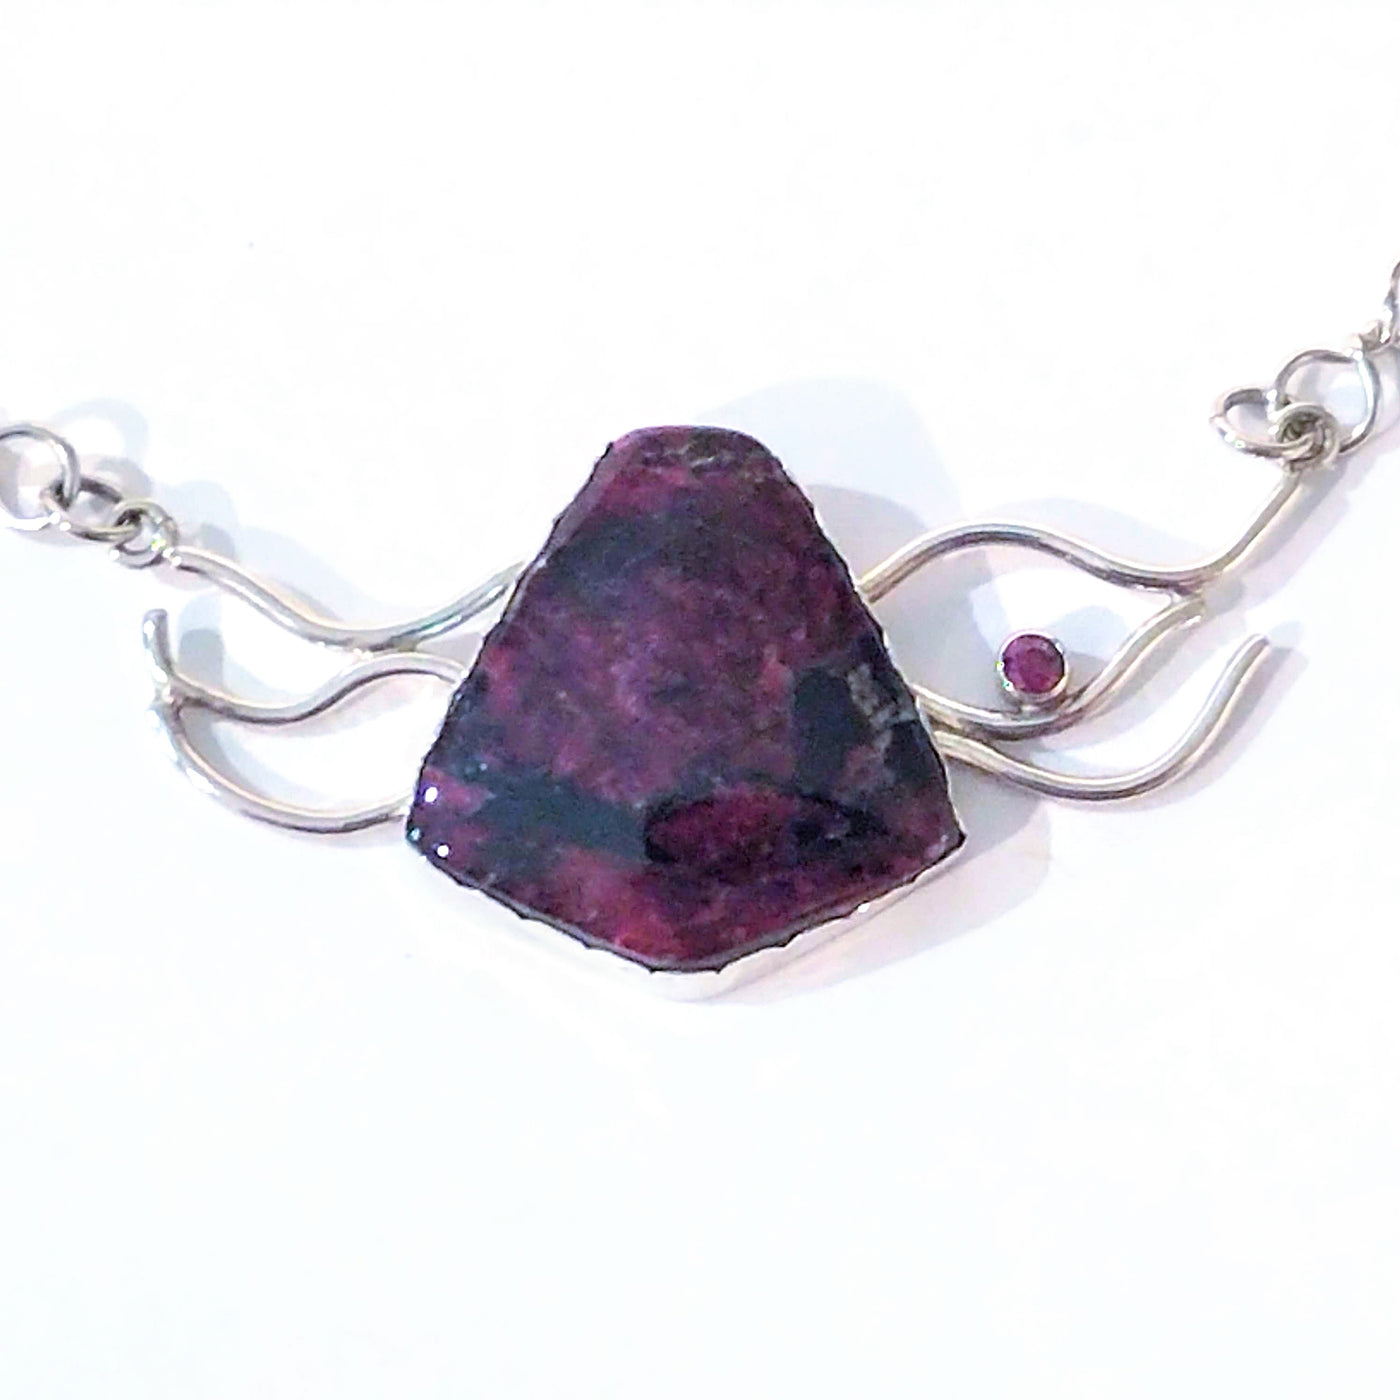 VC-093 - Eudialyte & Garnet Wave Pendant with Fine Silver Chain